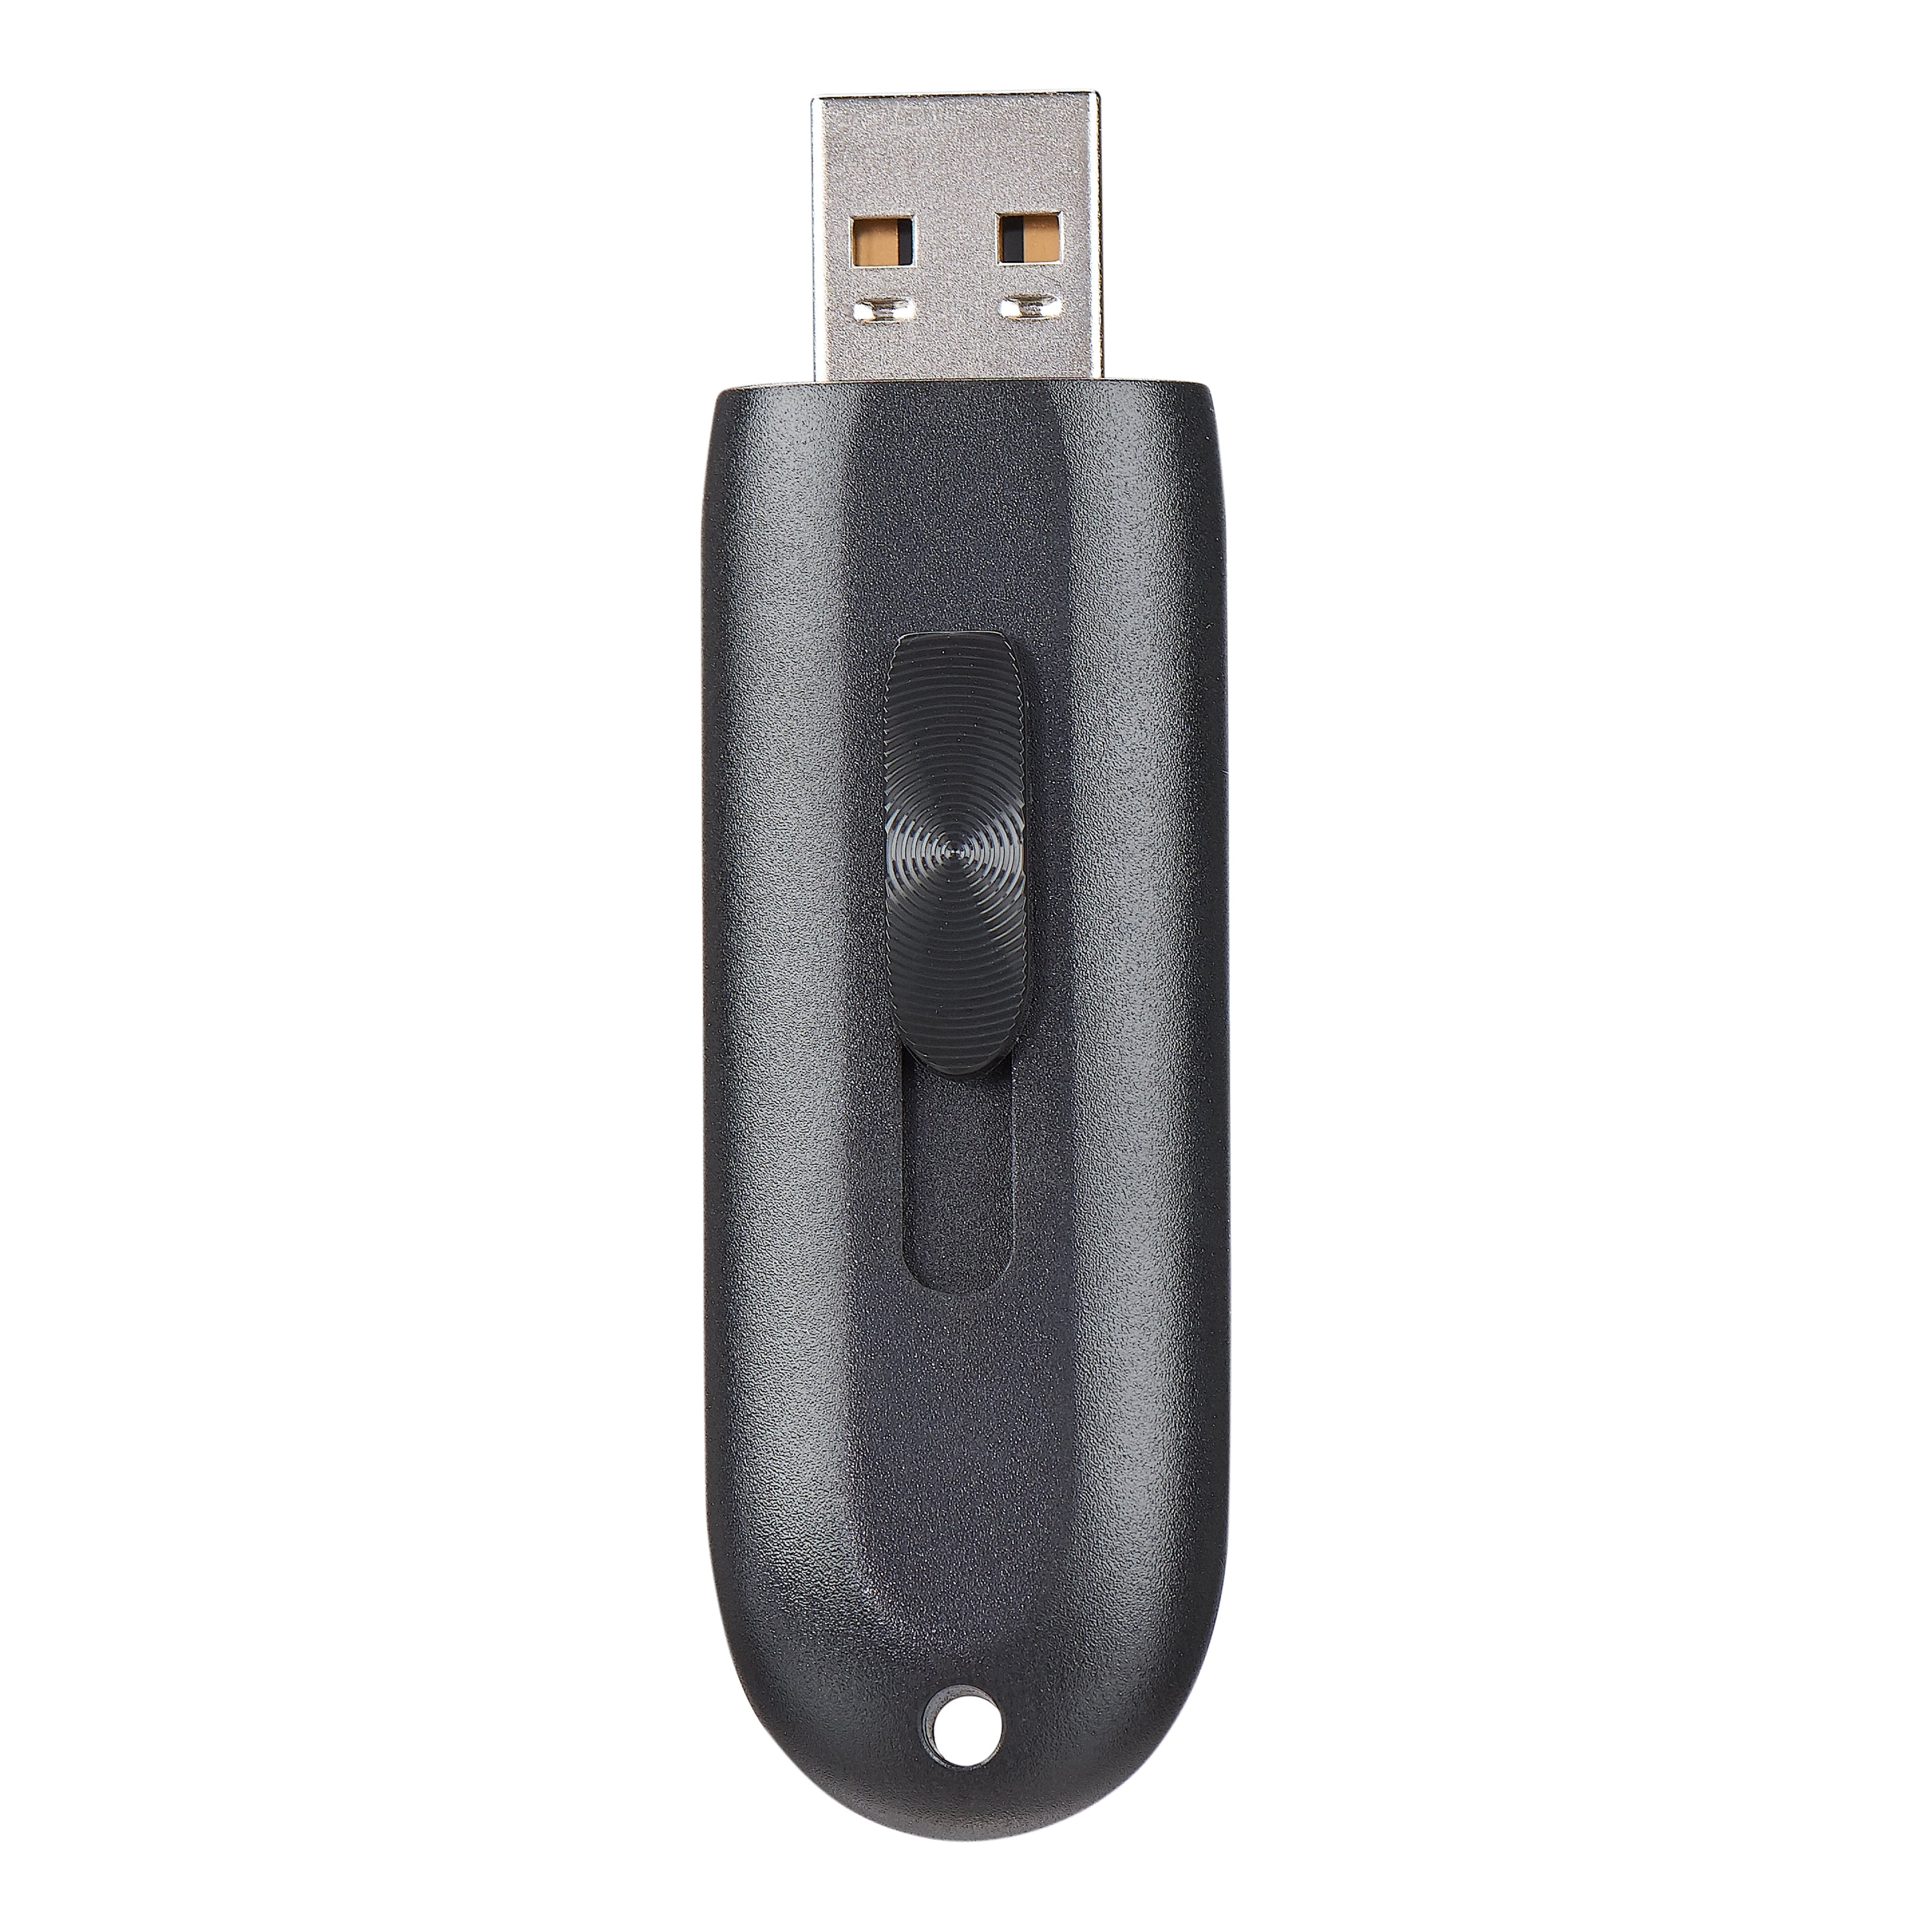 Black Leather Only ON SALE NOW!! USB 32 GB Flash Drive Stick 